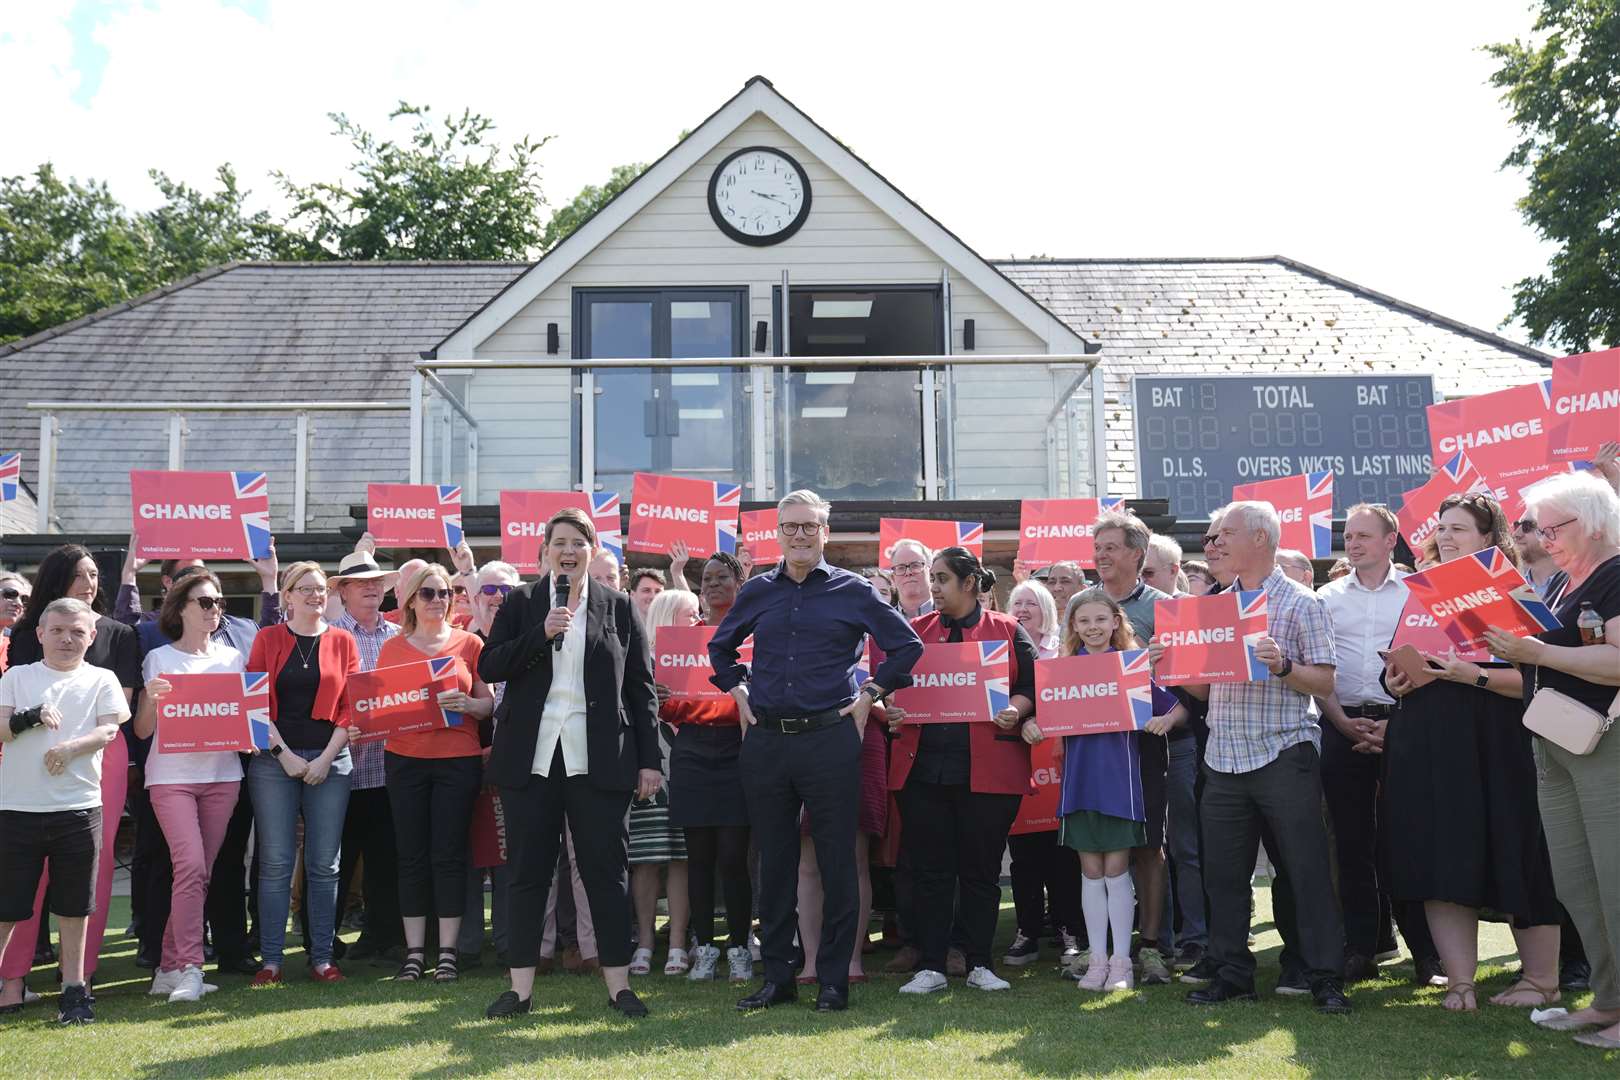 Labour Party leader Sir Keir Starmer and local parliamentary candidate Olivia Bailey during a visit to Douai Park Tennis Club, Reading (Stefan Rousseau/PA)